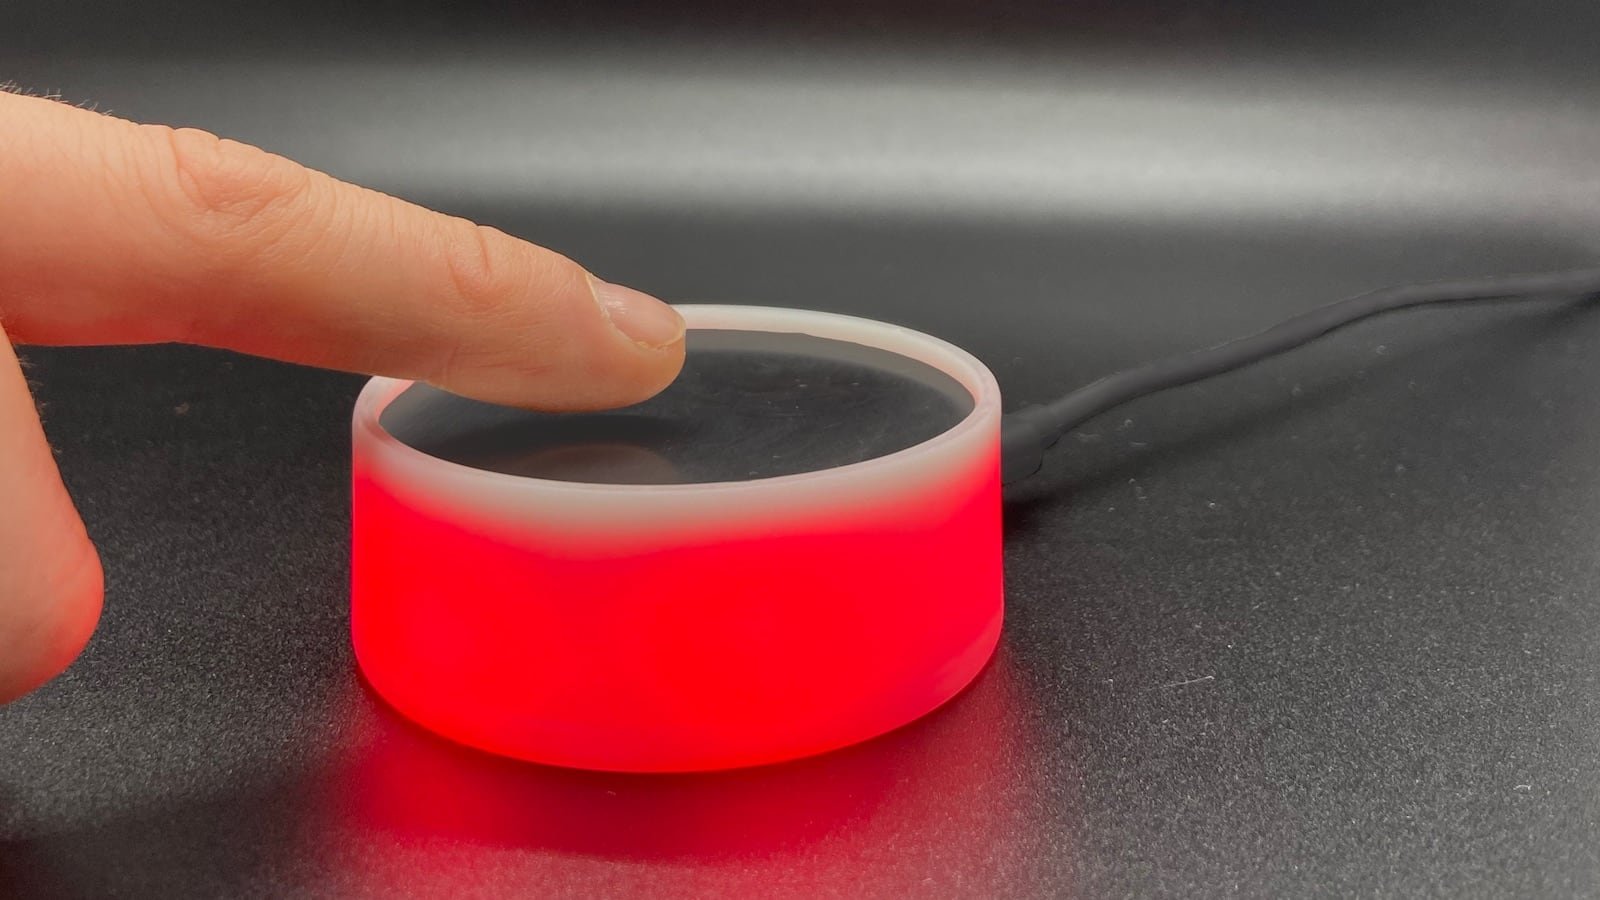 MuteMe illuminated mute button increases productivity and decreases interruptions